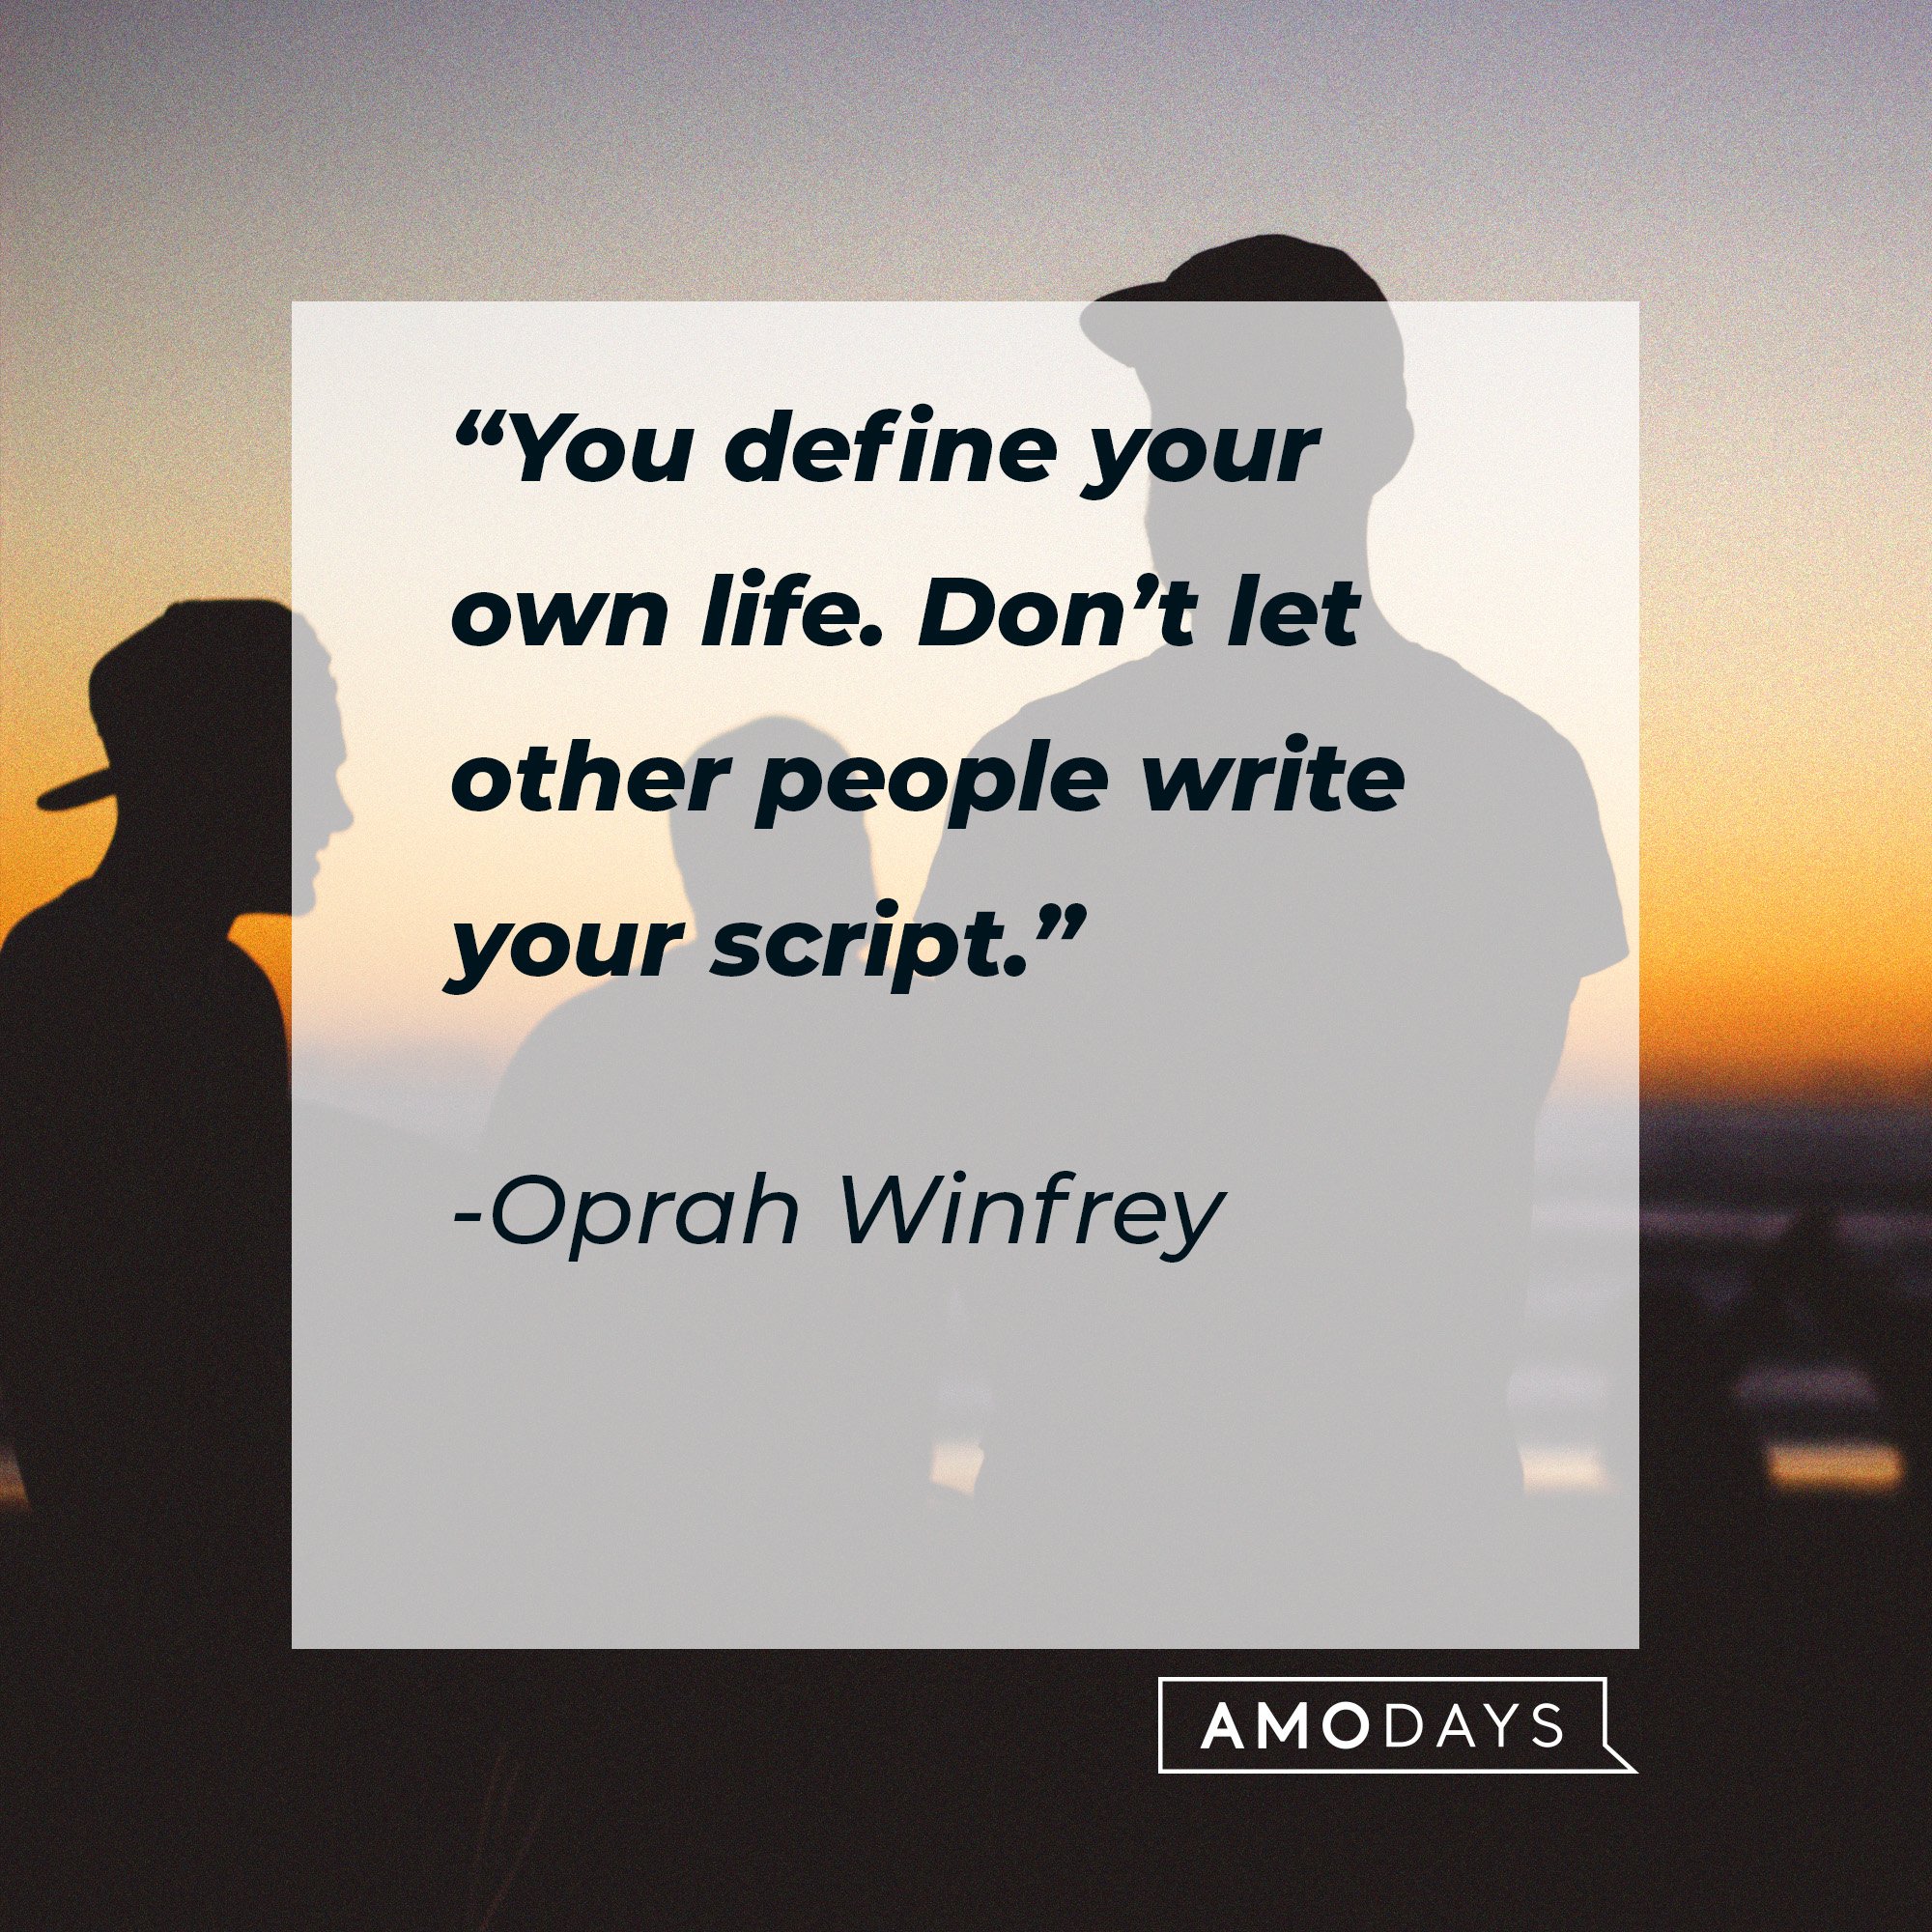 Oprah Winfrey's quote: “You define your own life. Don’t let other people write your script.” | Image: AmoDays